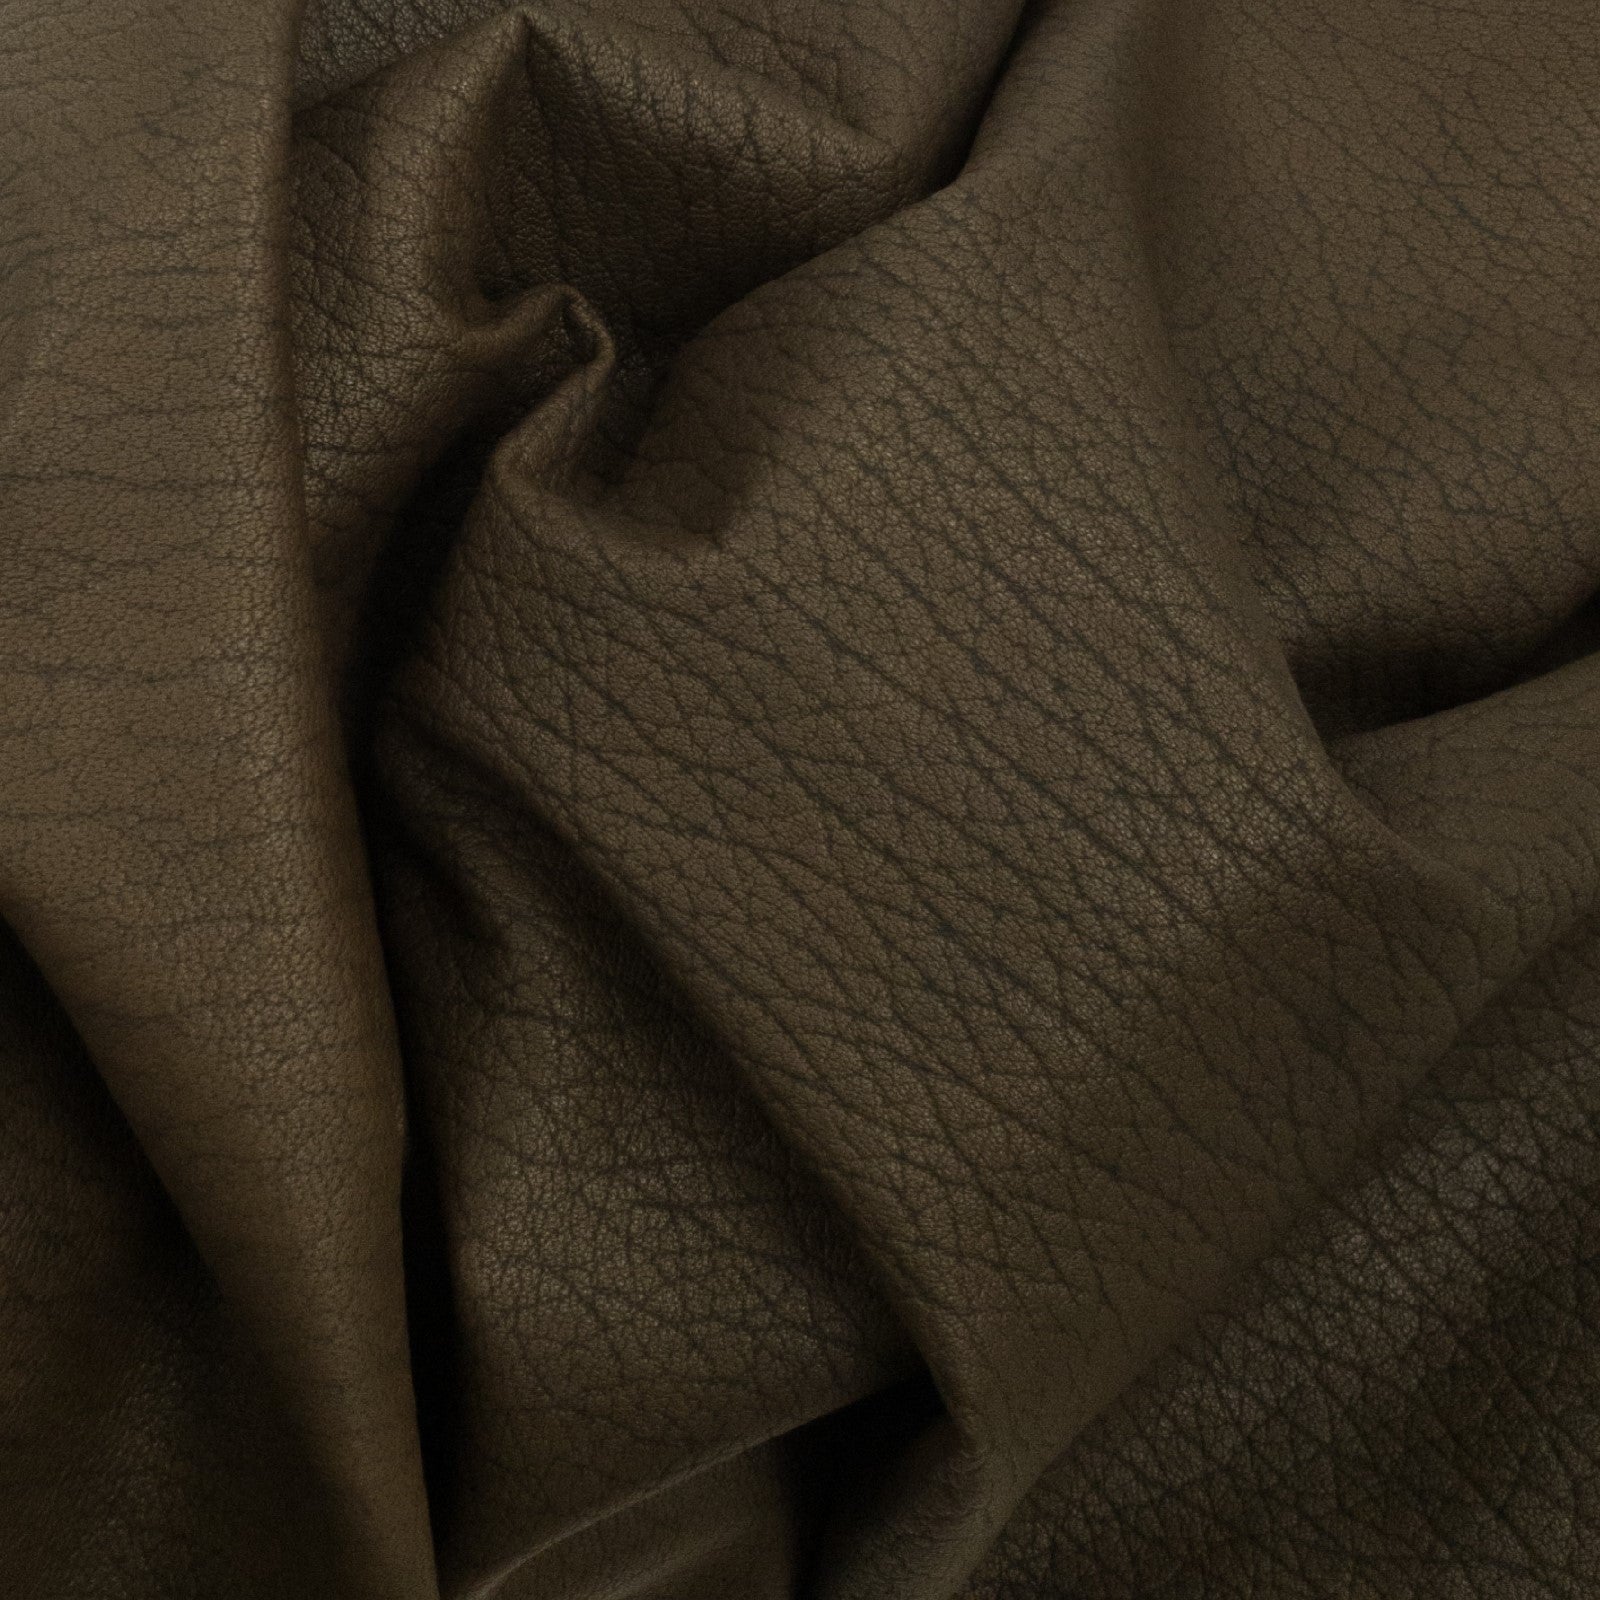 Dark Browns, 3-10 Sq Ft, 1-3 oz, Lamb Hides, Low Grade Chocolate Crackle / 9-10 | The Leather Guy